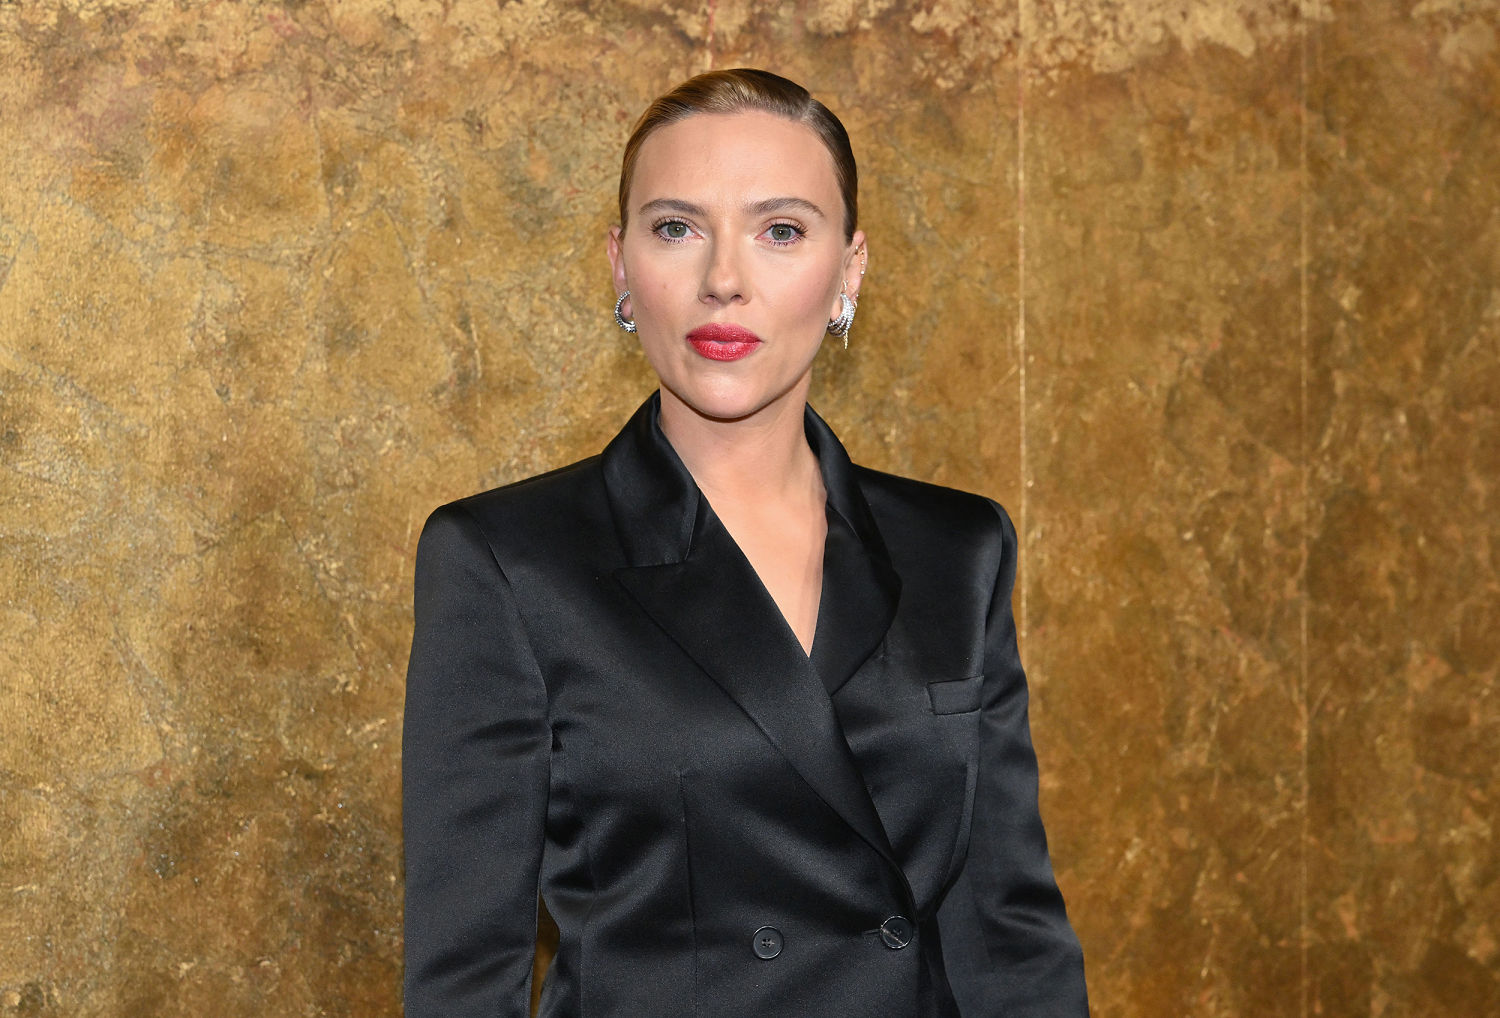 Scarlett Johansson says she was 'shocked, angered' when she heard OpenAI's ChatGPT voice that sounded like her